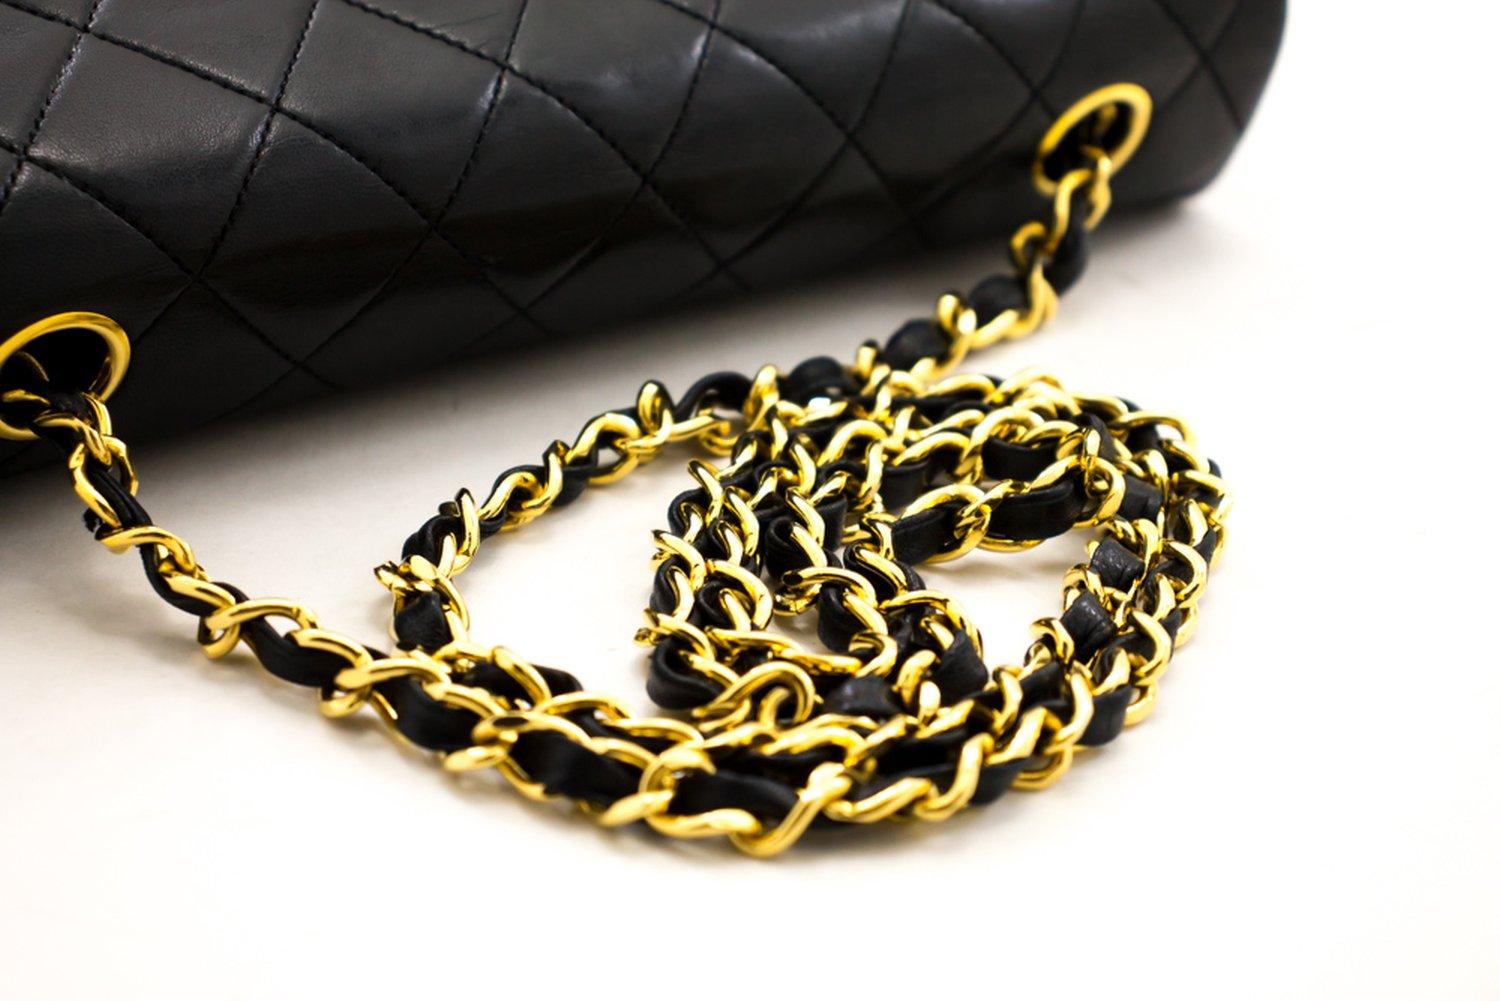 CHANEL Chain Shoulder Bag Black Flap Quilted Lambskin Leather 8